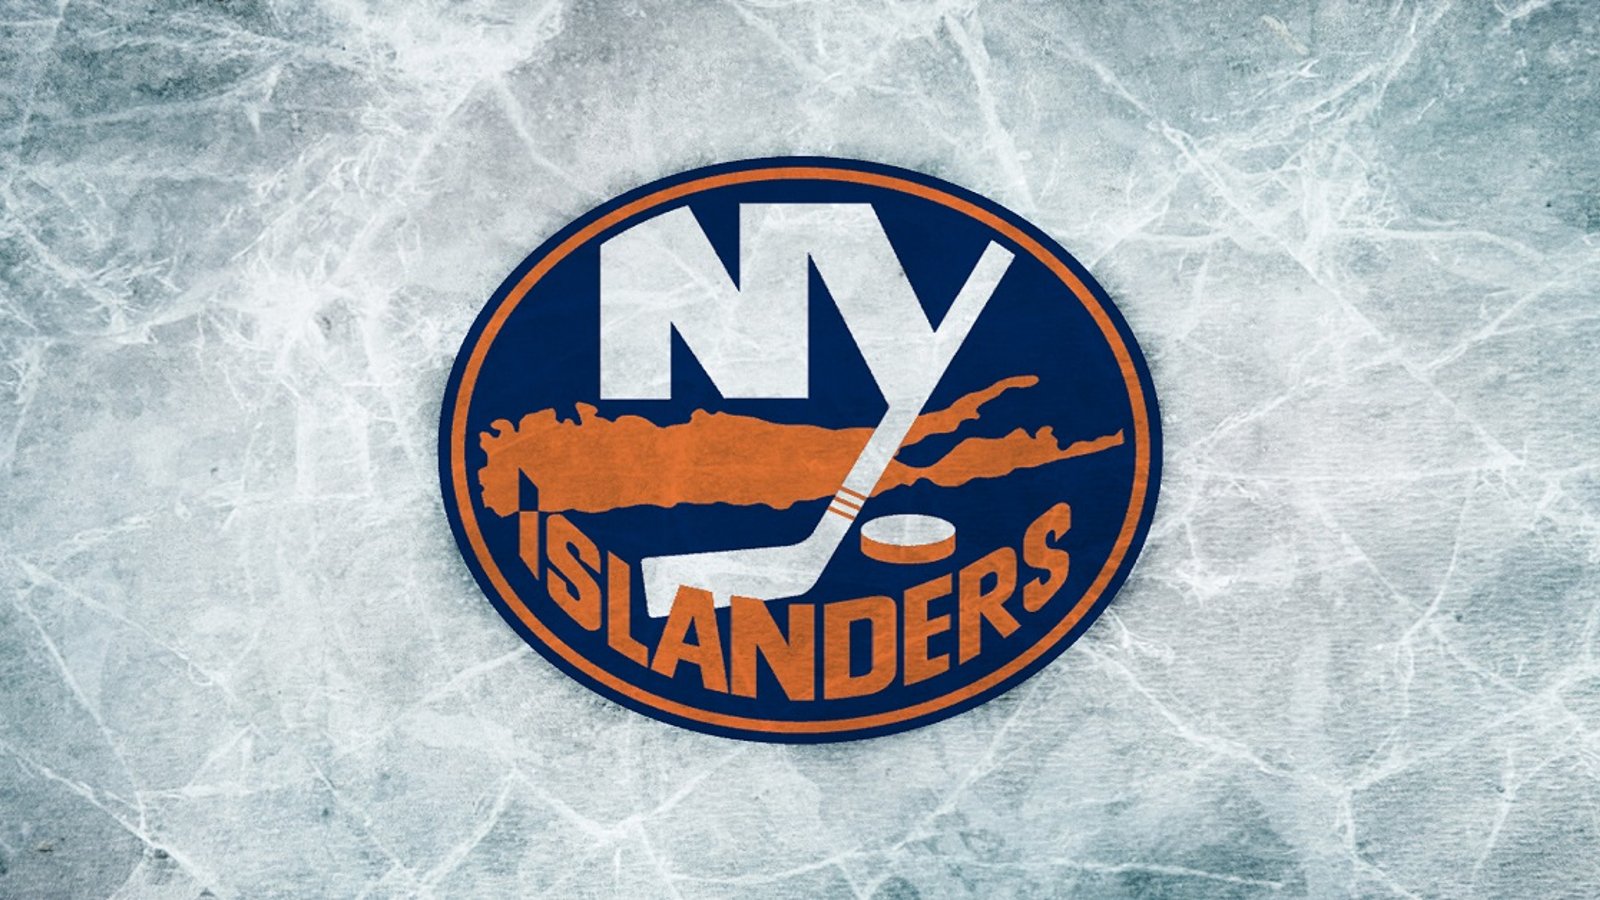 The Islanders seem to have turned things around.